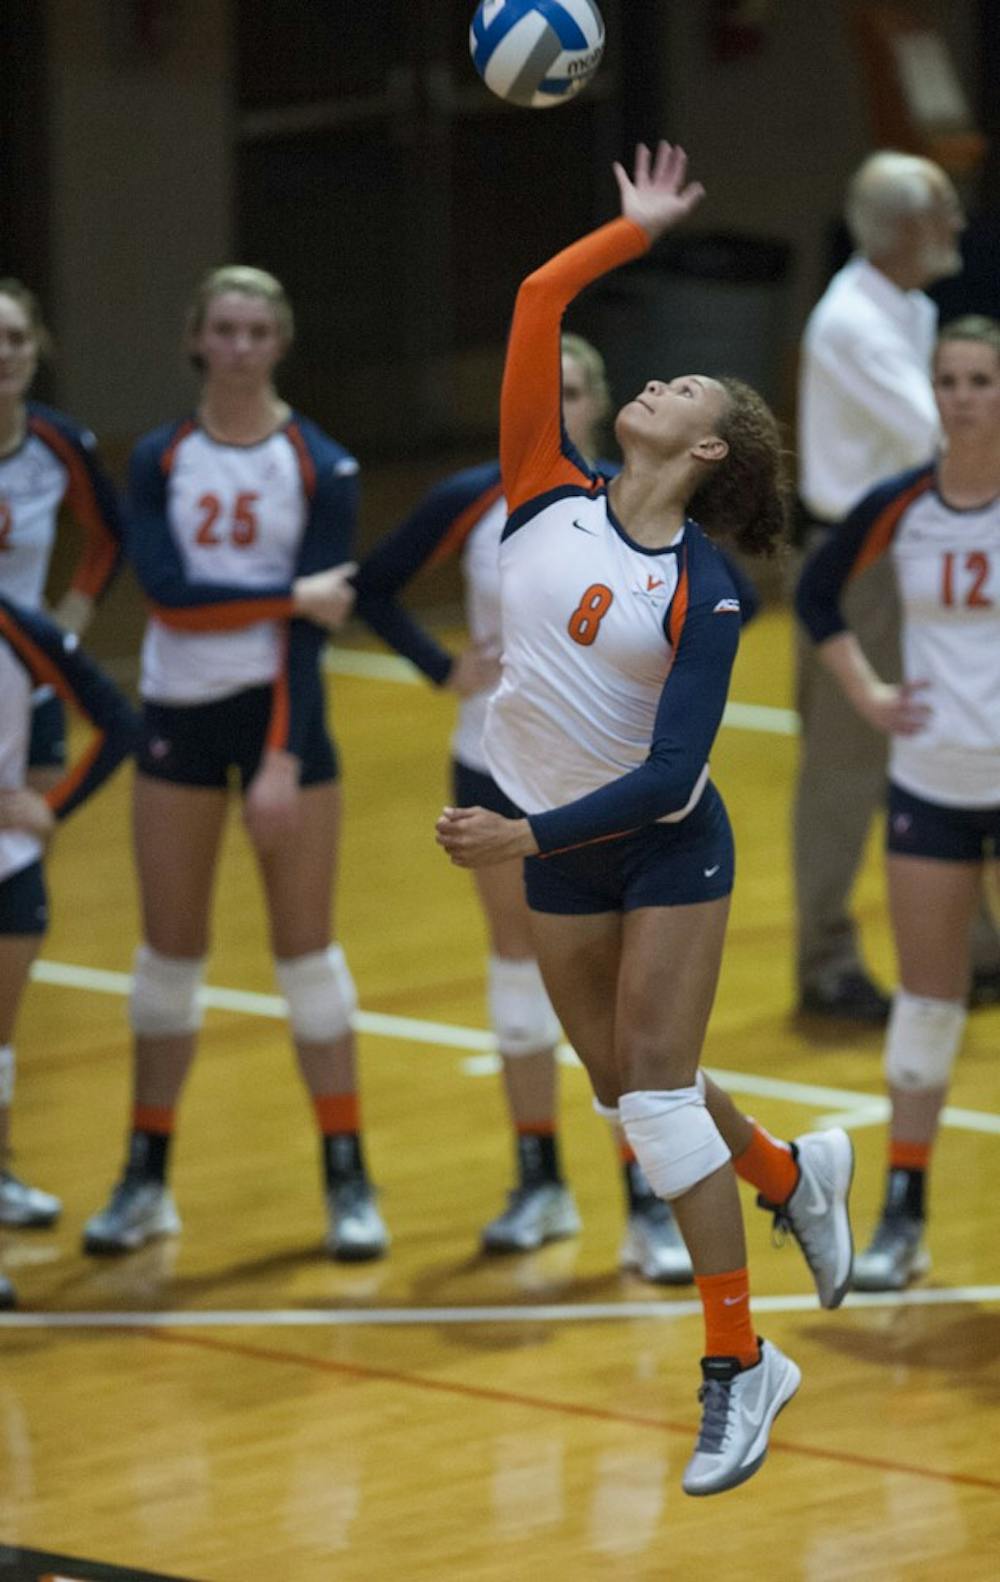 <p>Senior outside hitter Tori Janowski tallied 34 kills in the Virginia wins, becoming the 16th player in program history to surpass 1,000 kills for her career. </p>